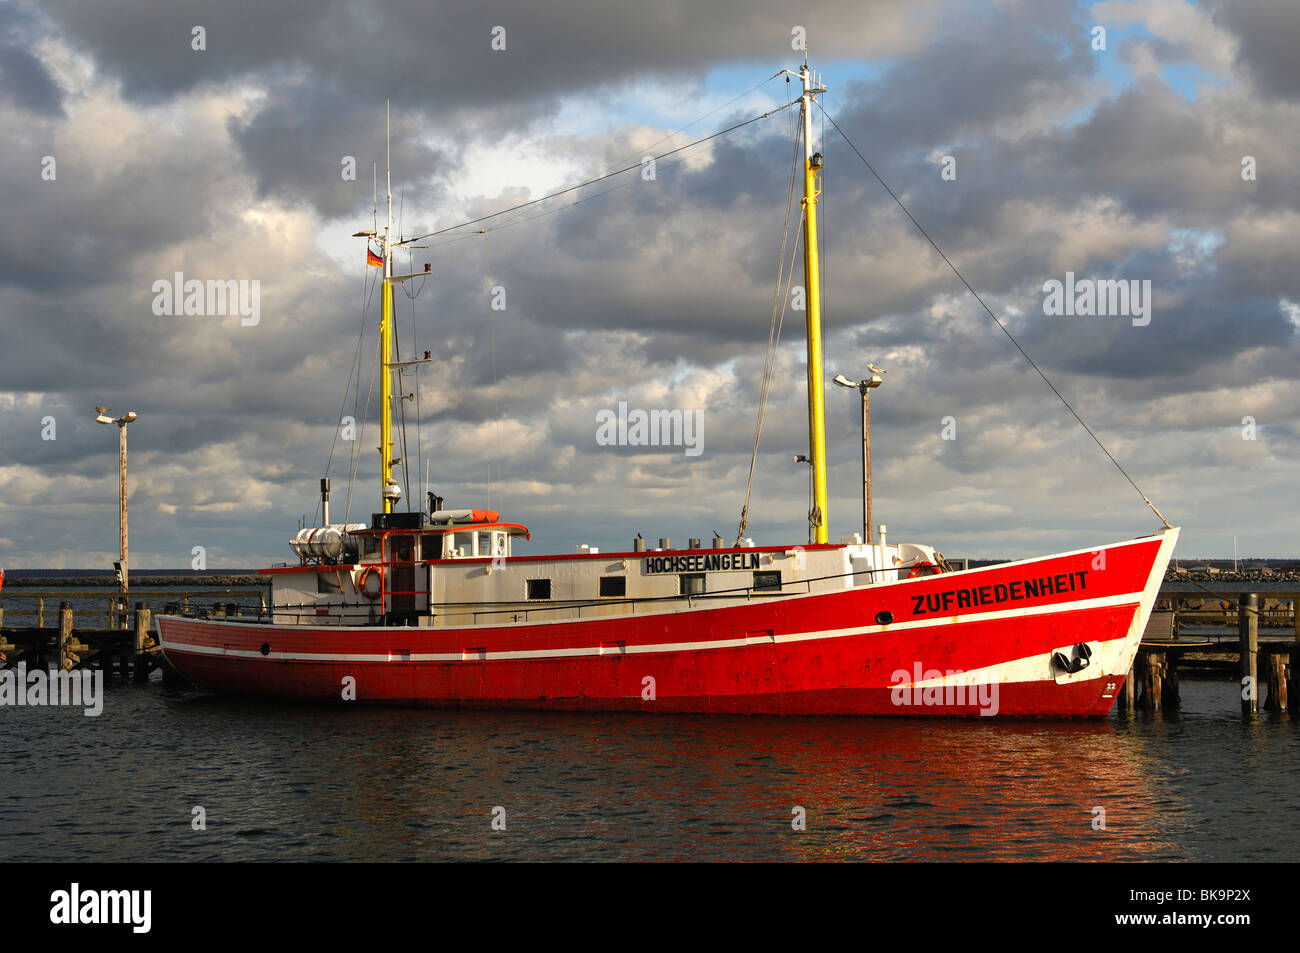 Deep water fishing ship Zufriedenheit, Satisfaction, moored at the pier of the Rostock-Warnemuende port, Germany Stock Photo